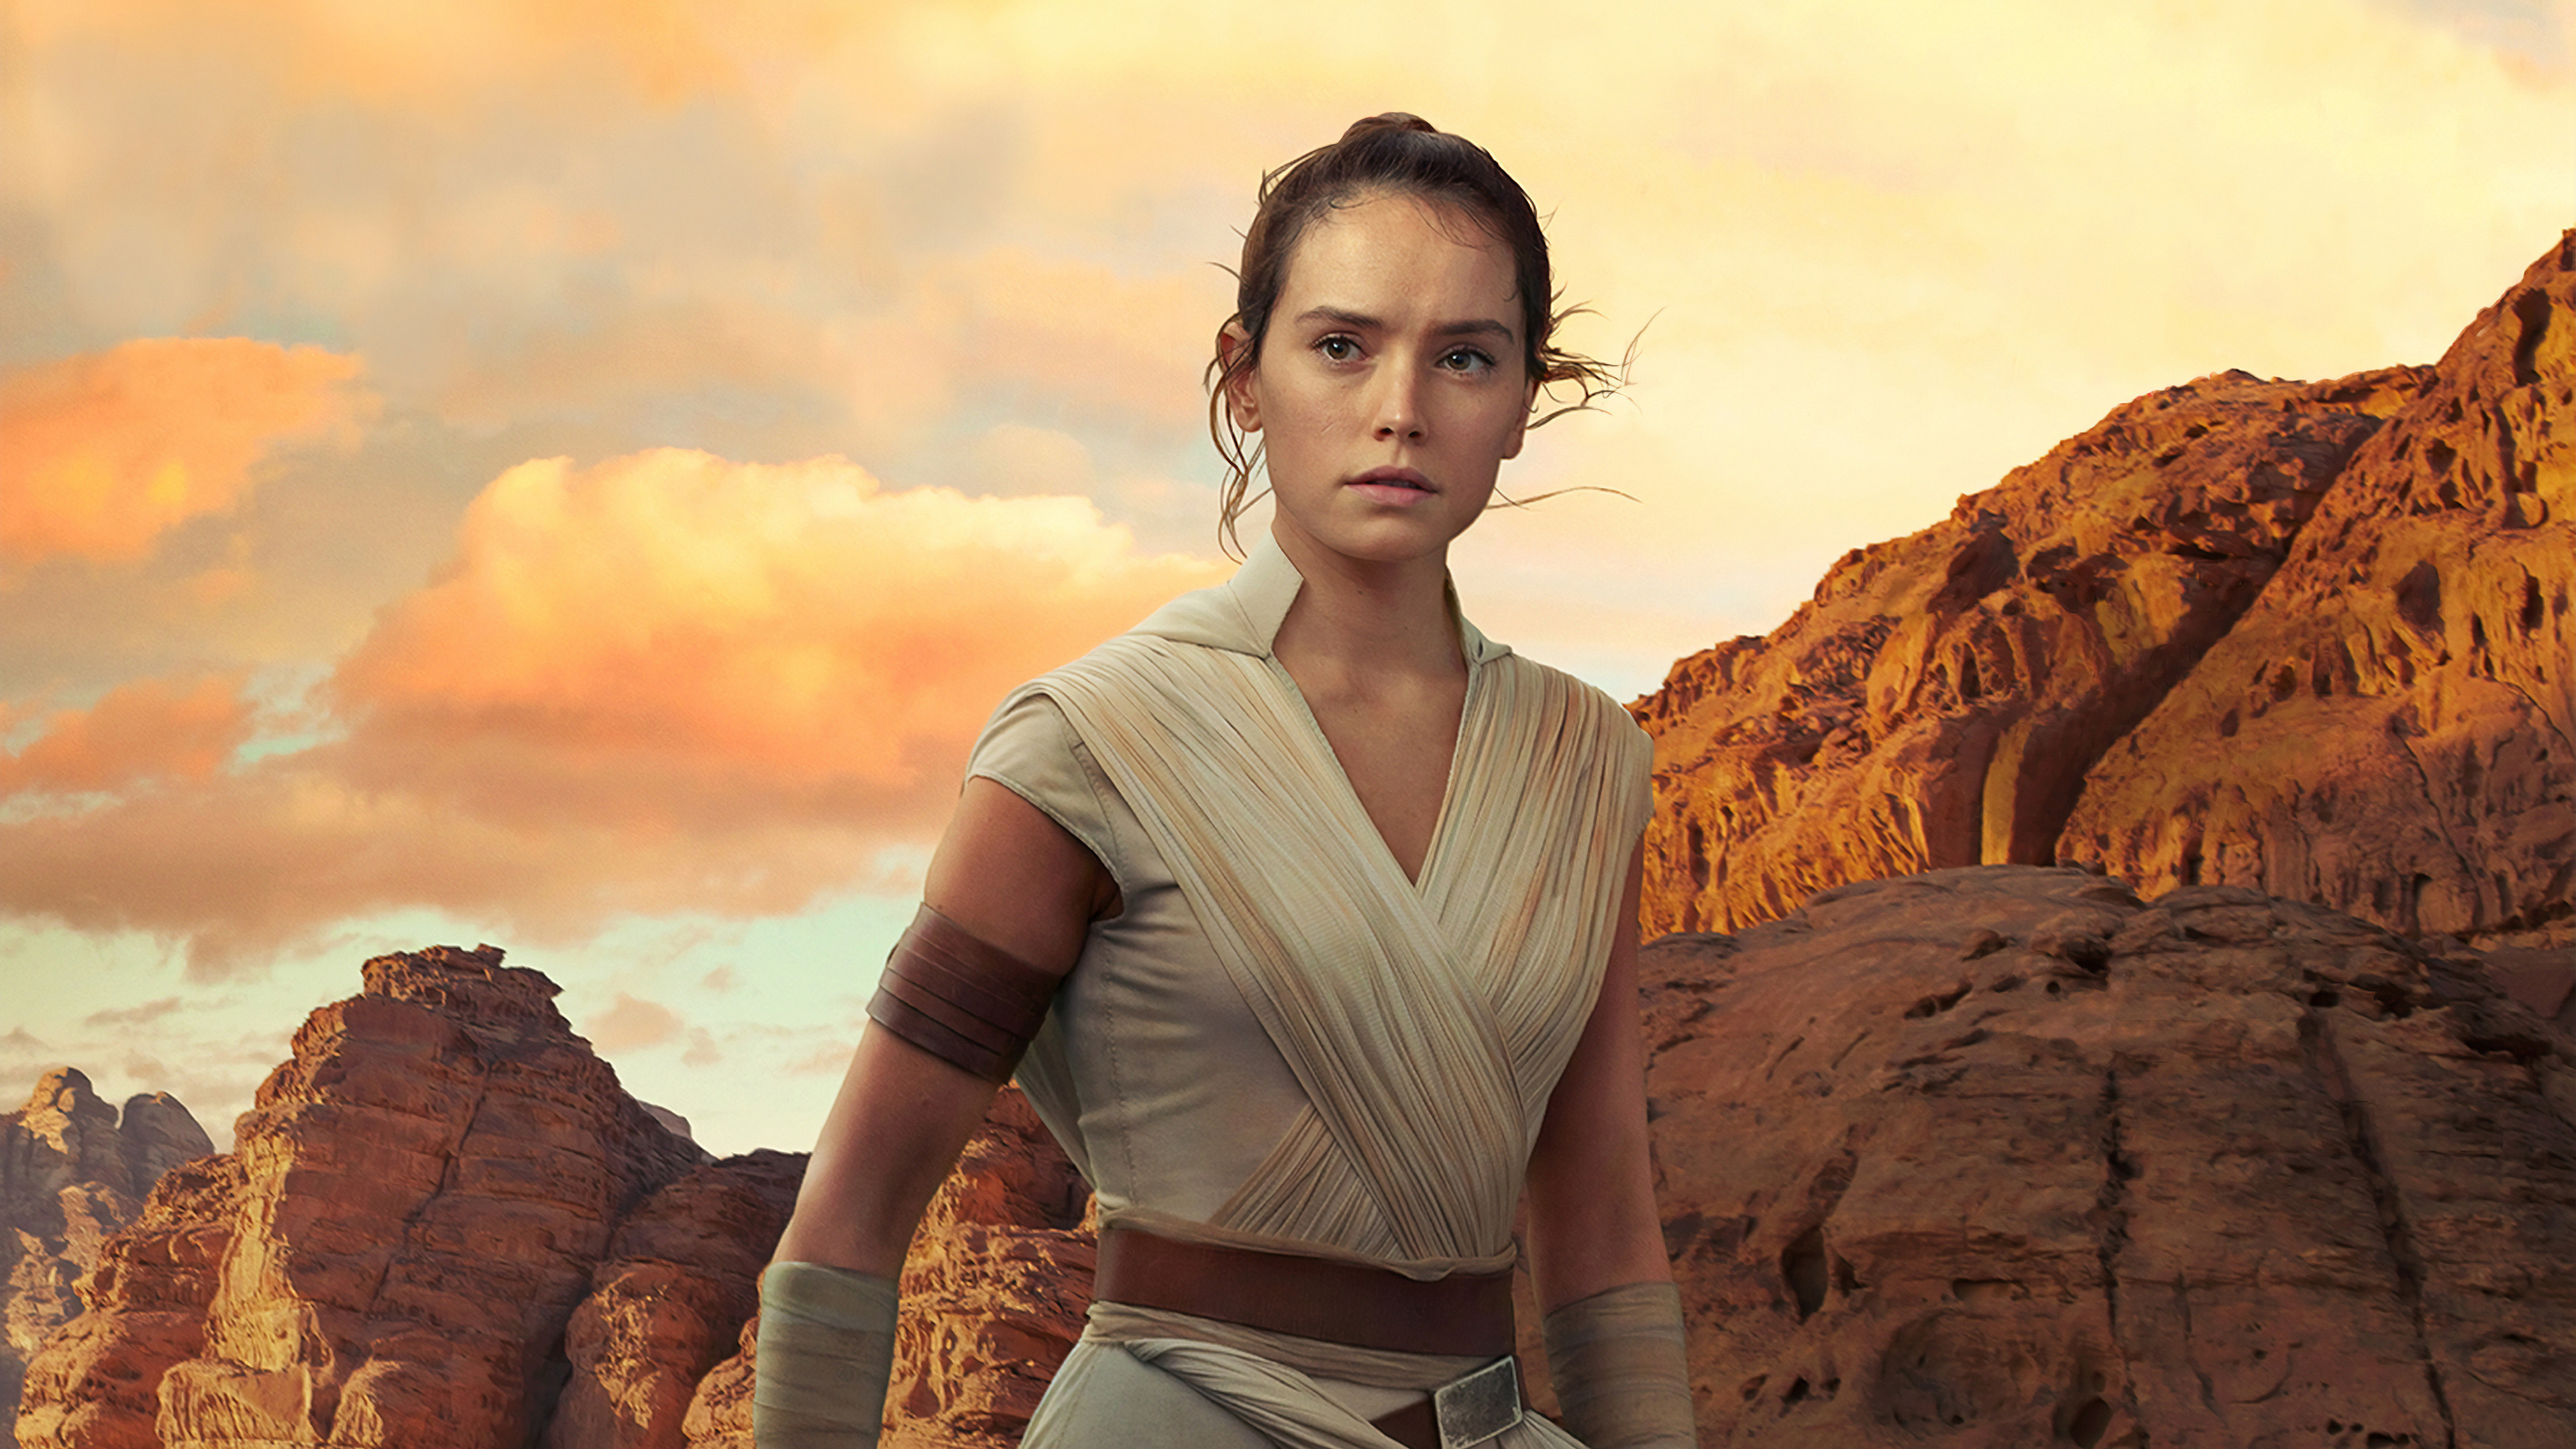 Wallpaper Star Wars: The Rise of Skywalker, Daisy Ridley, 4K, Movies #21782